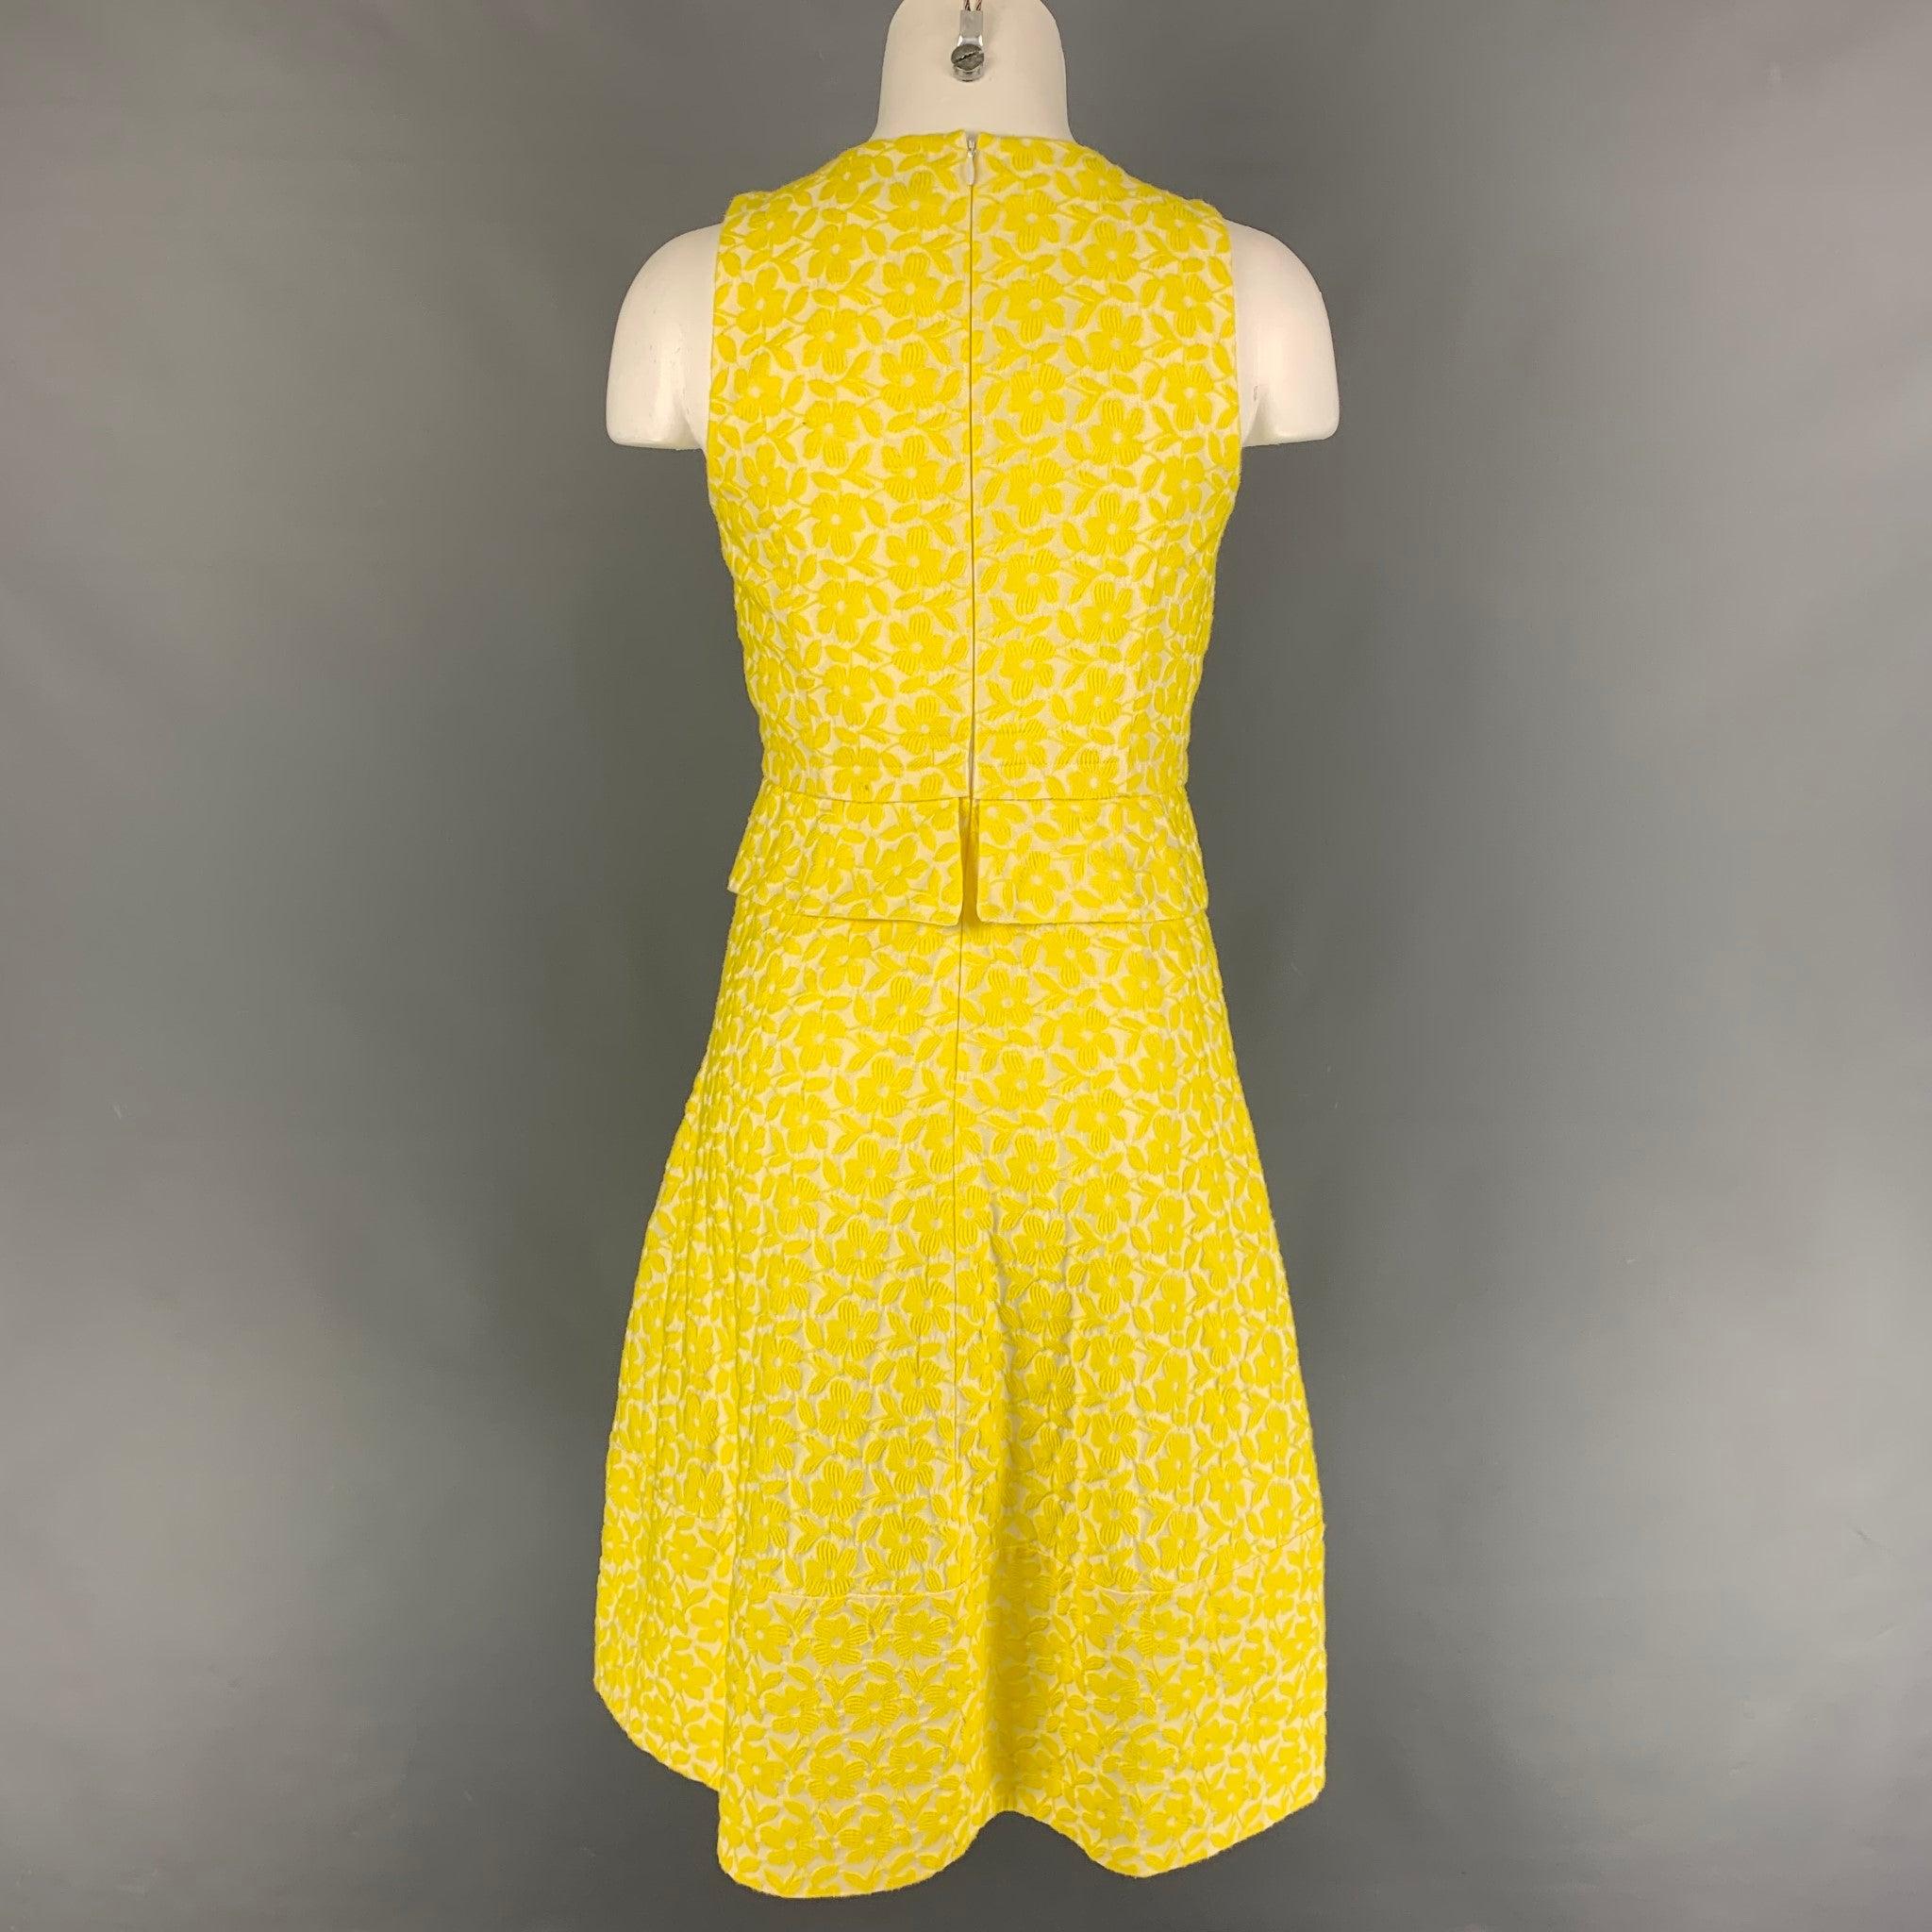 JIL SANDER Size 2 Yellow White Jacquard Cotton Blend A-Line Dress In Good Condition For Sale In San Francisco, CA